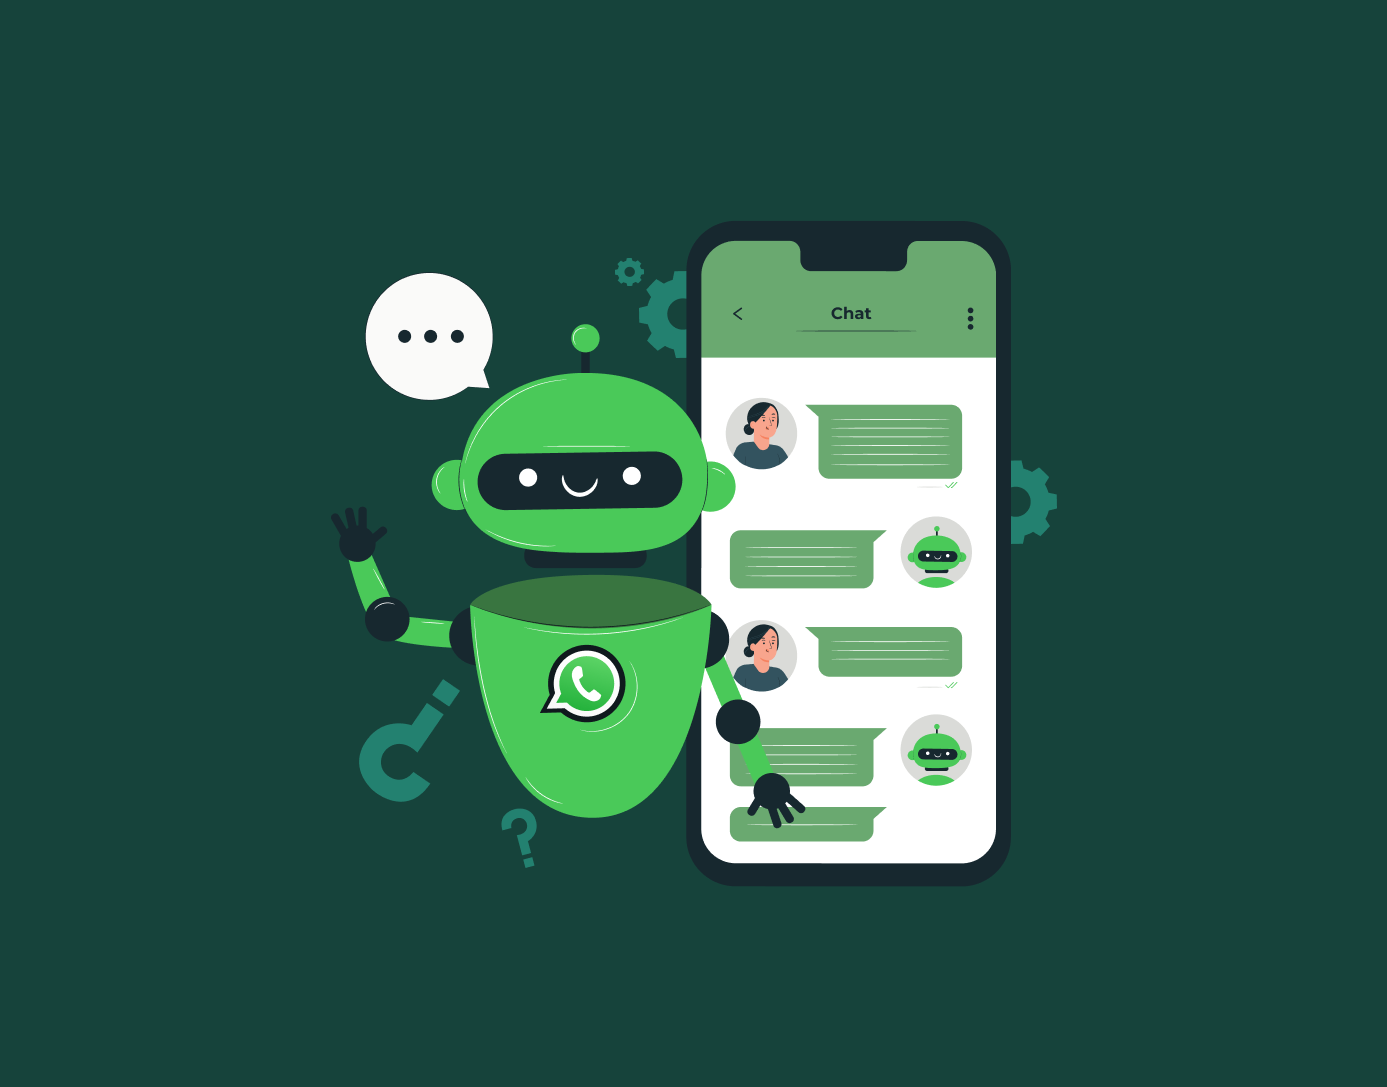 644e904fa95f11e1c3a3bfbf_Quick and Easy Guide to Developing a WhatsApp Chatbot in 8 Easy Steps!